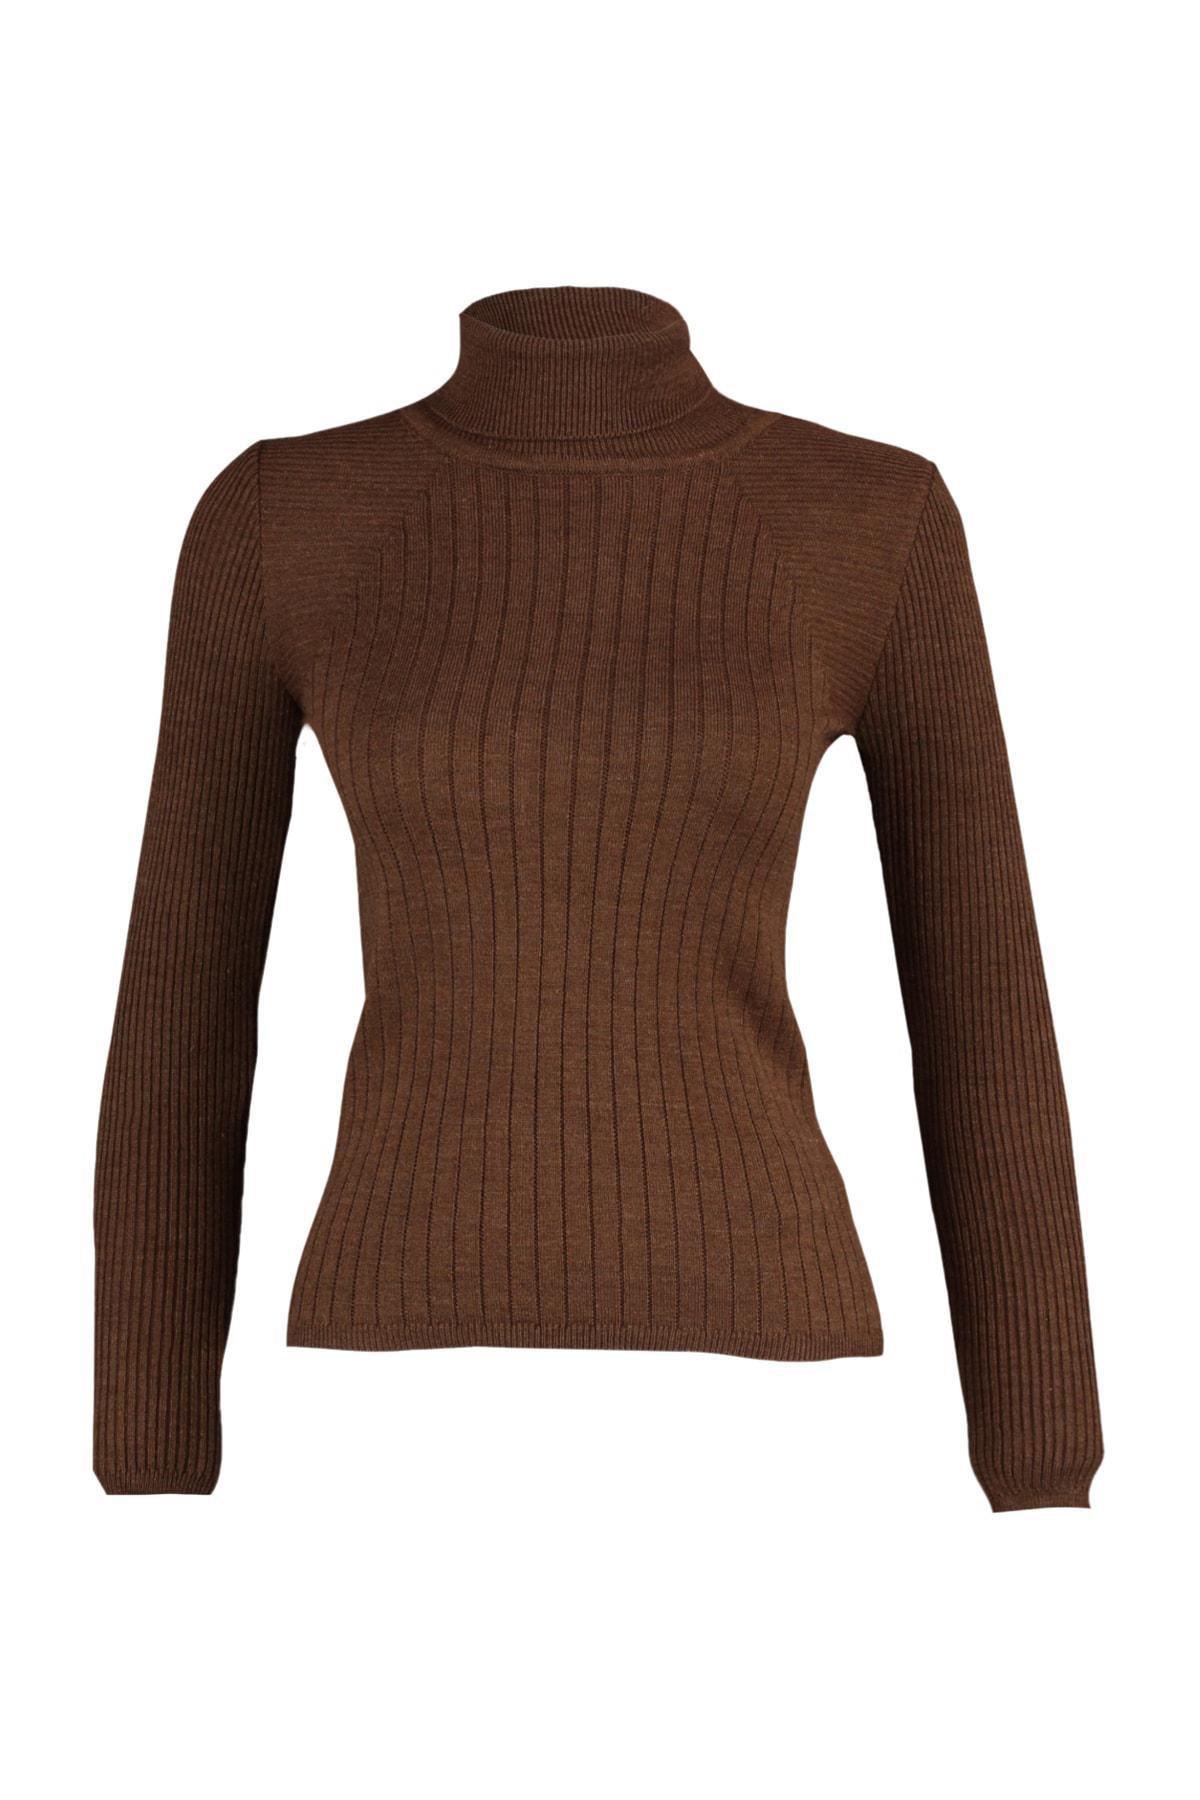 Trendyol - Brown Knitted Sweater